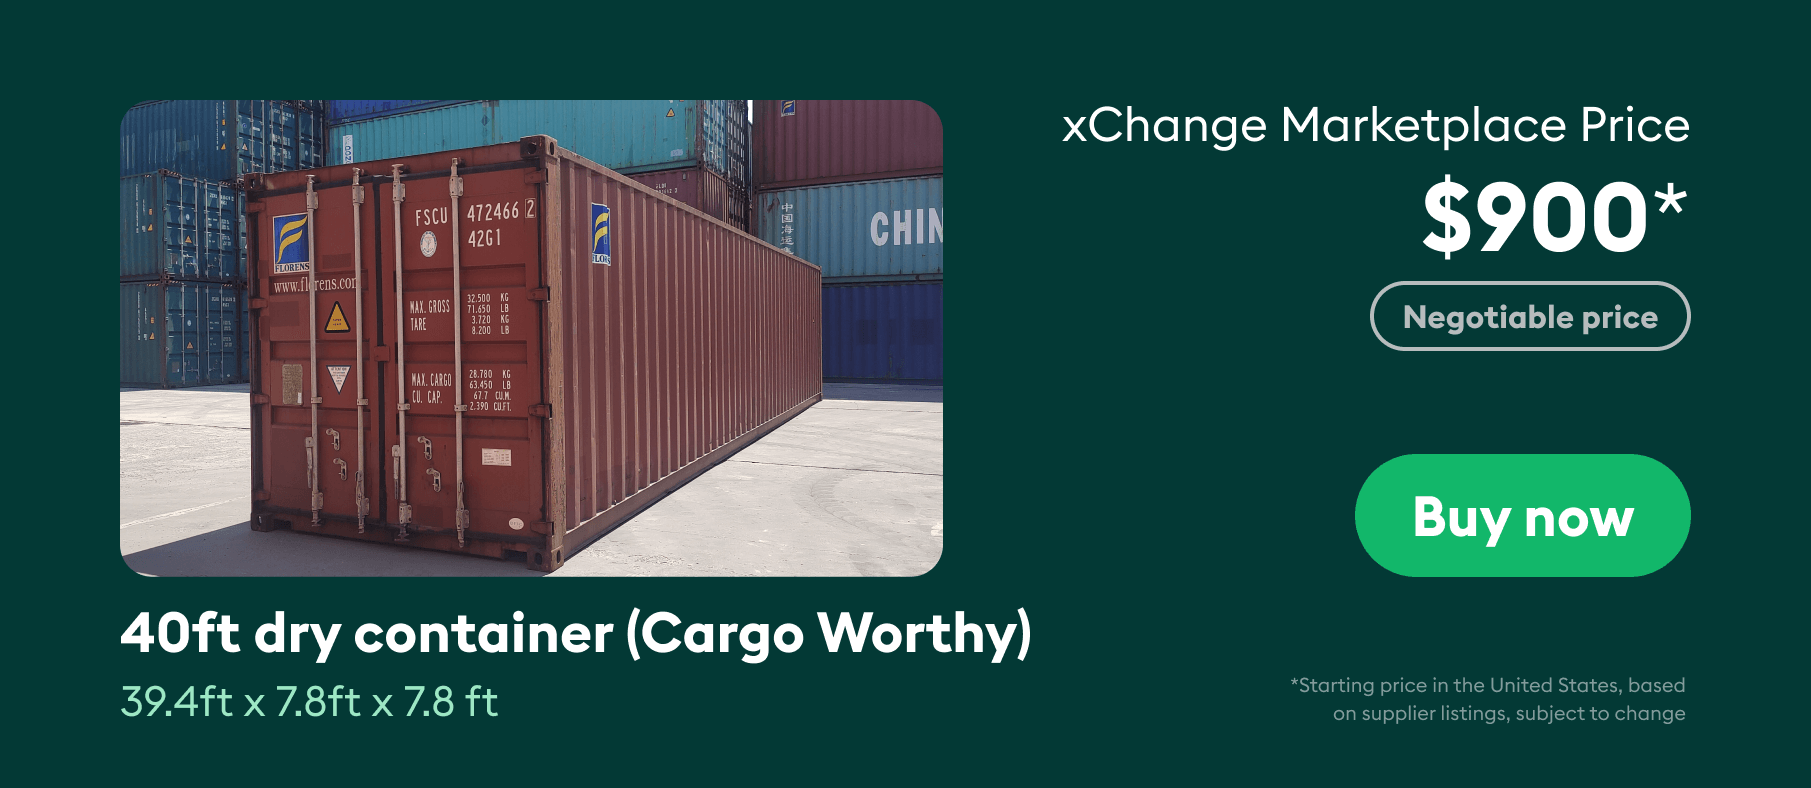 The xChange marketplace price of 40ft used (cargo worthy) container is $900 and is negotiable.